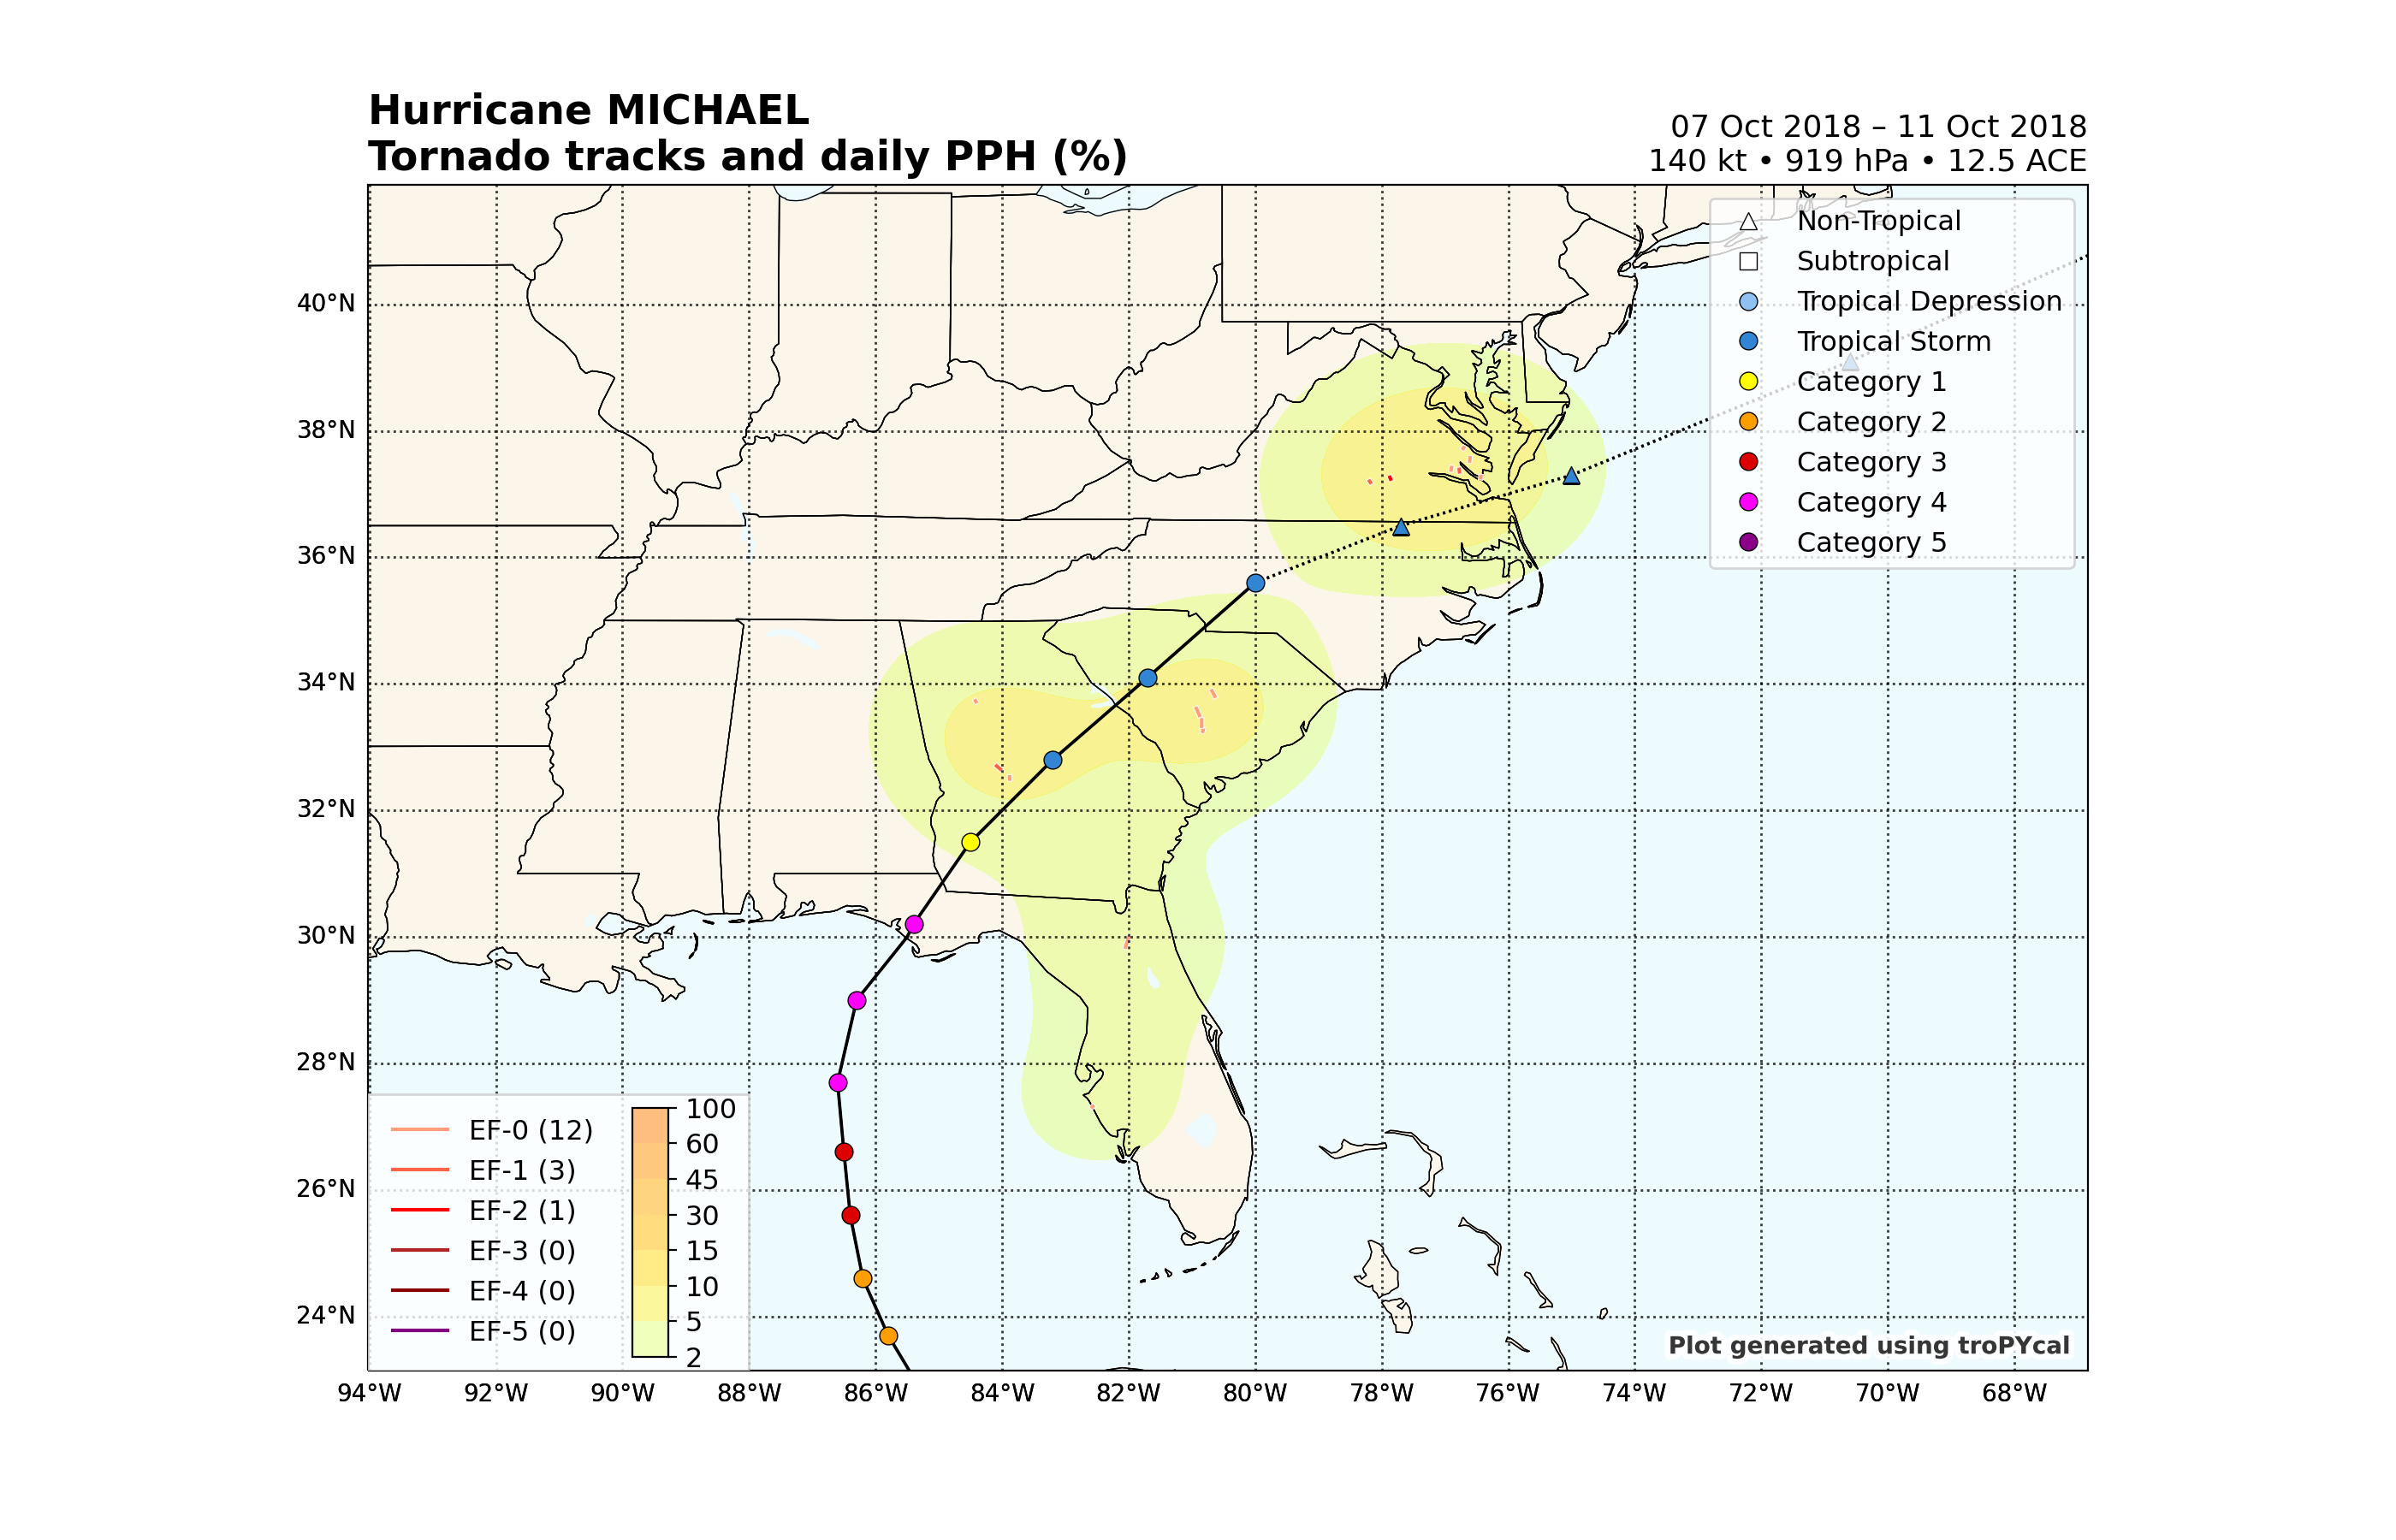 Hurricane MICHAEL Tornado tracks and daily PPH (%), 07 Oct 2018 – 11 Oct 2018 140 kt • 919 hPa • 12.5 ACE